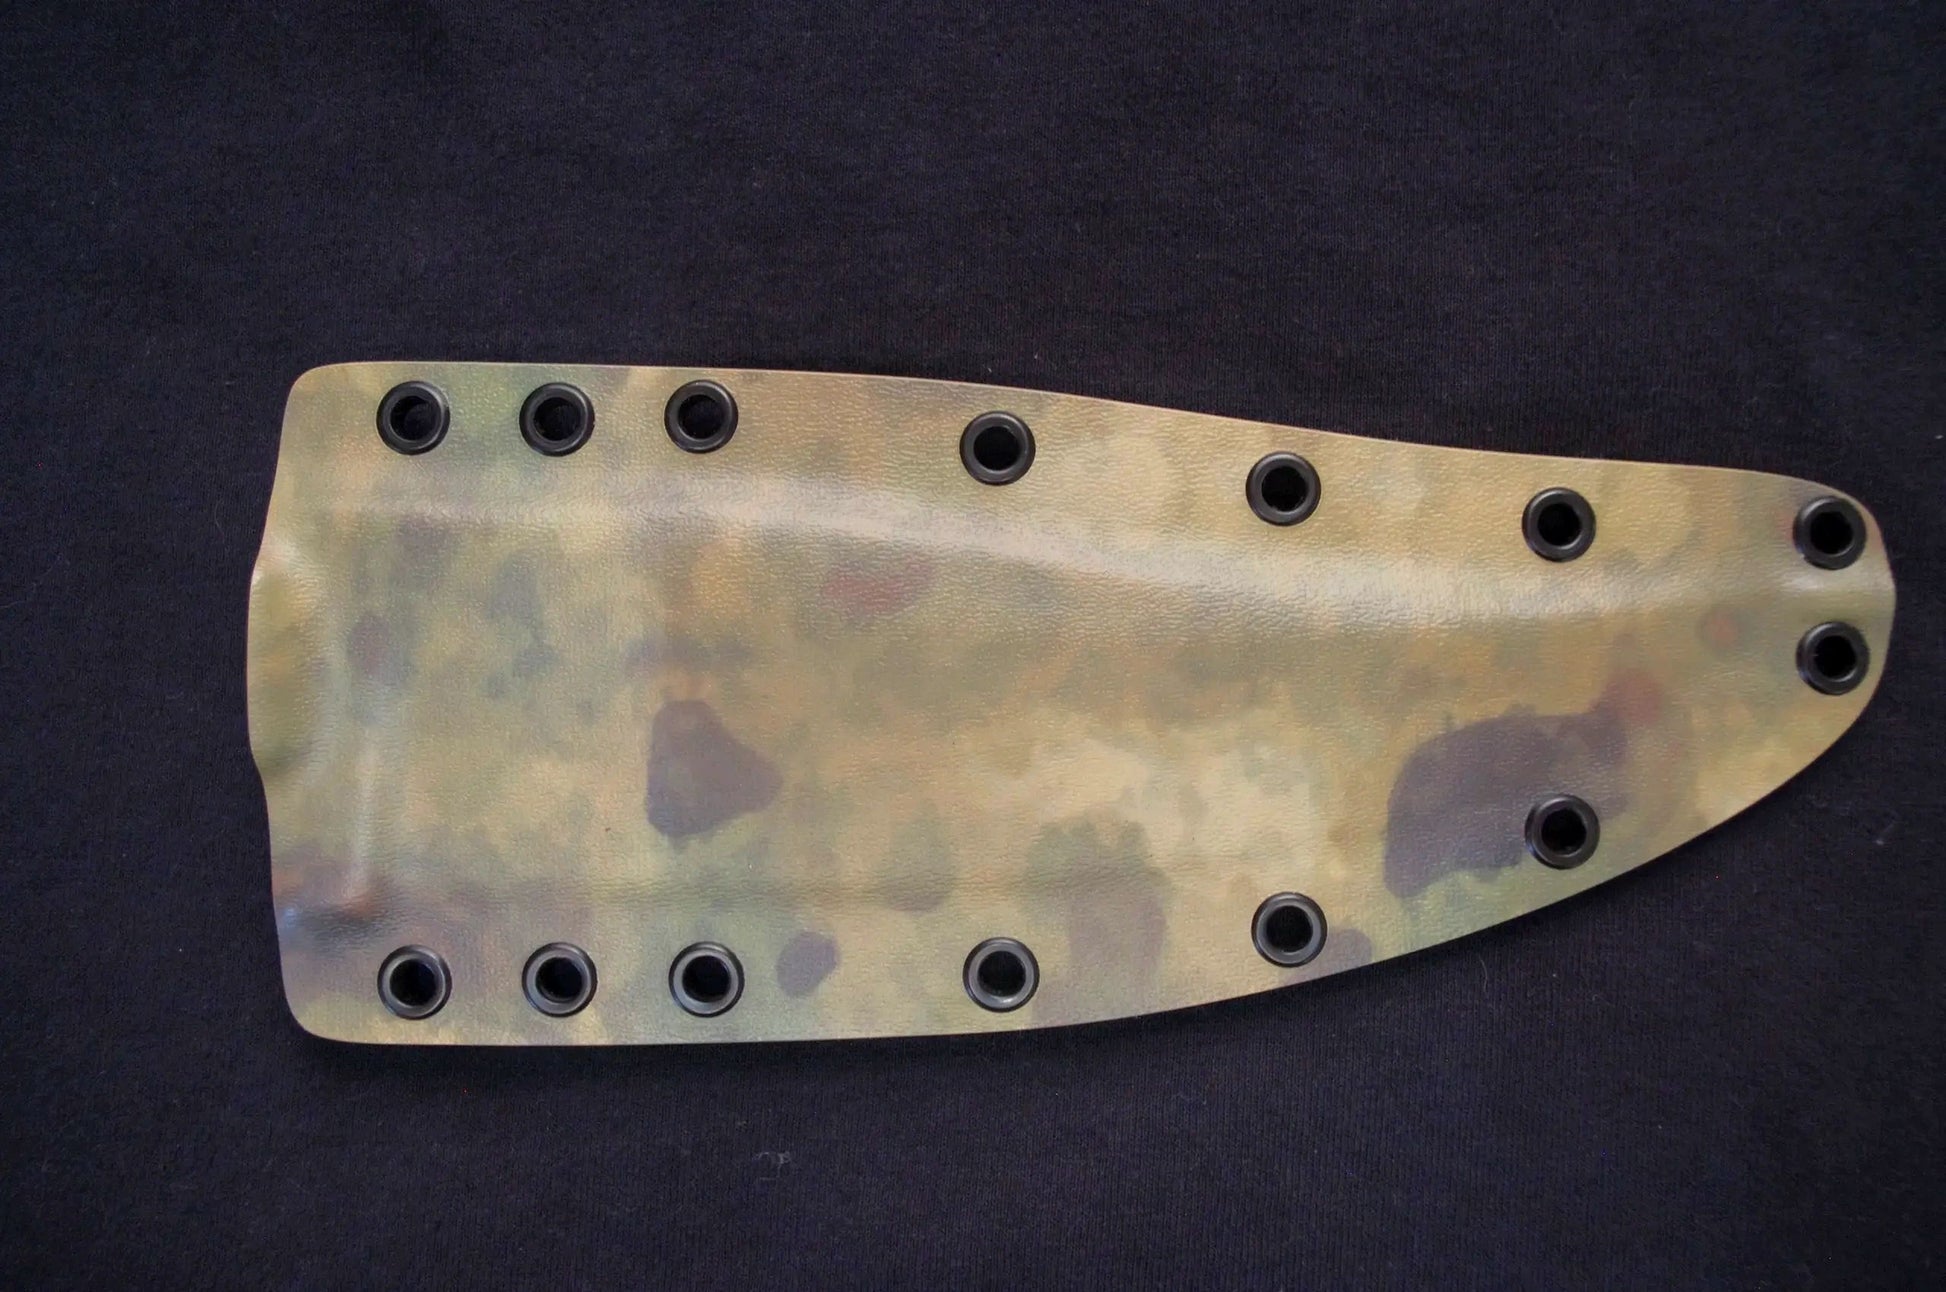 TOPS KNIVES PRATHER WAR BOWIE A-TACS FG CUSTOM KYDEX SHEATH BY RED HILL SHEATHS **NO KNIFE*